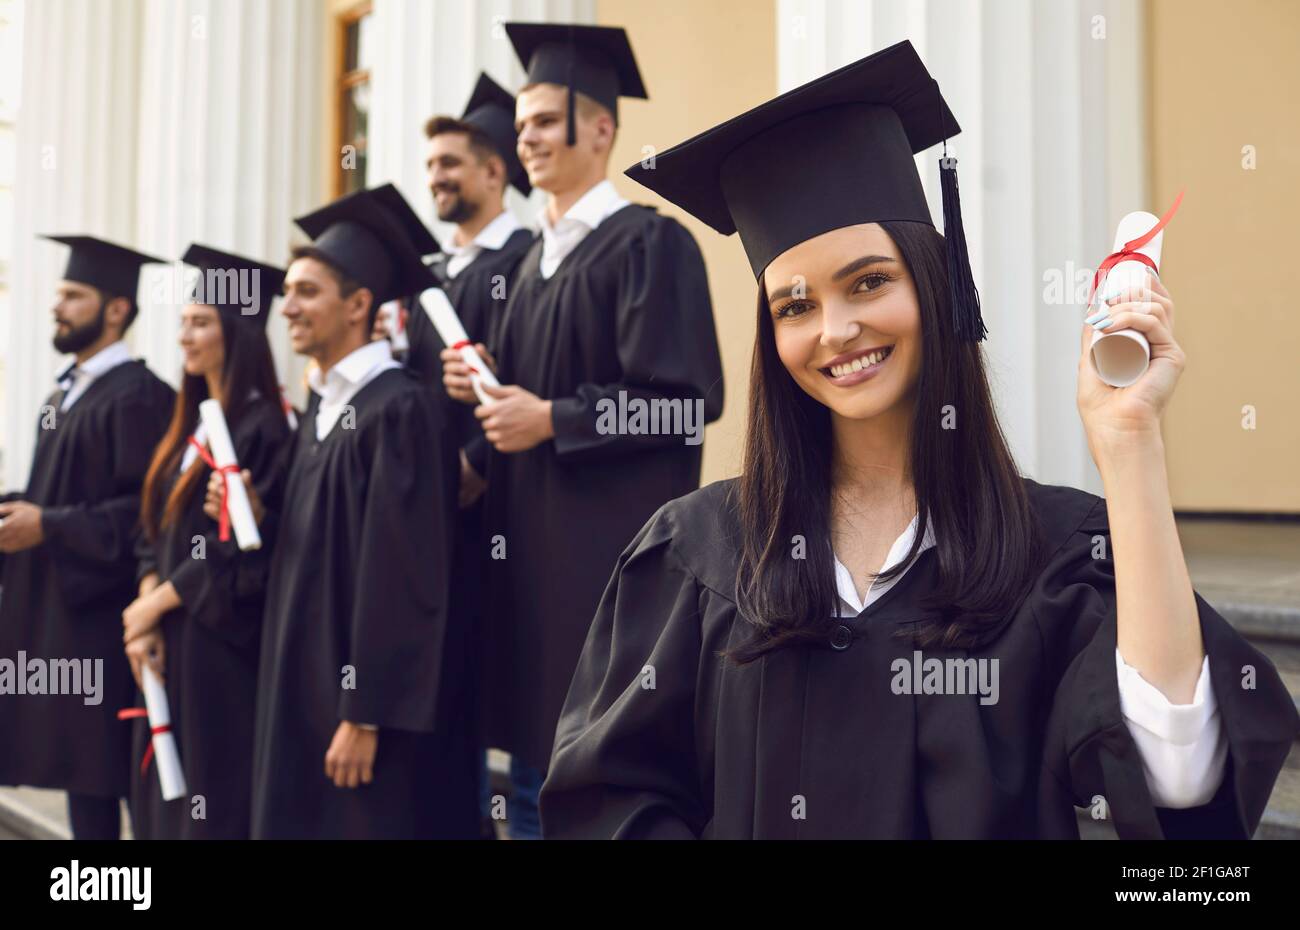 Young smiling girl university graduate standing holding diploma in raised hand over group of mates Stock Photo